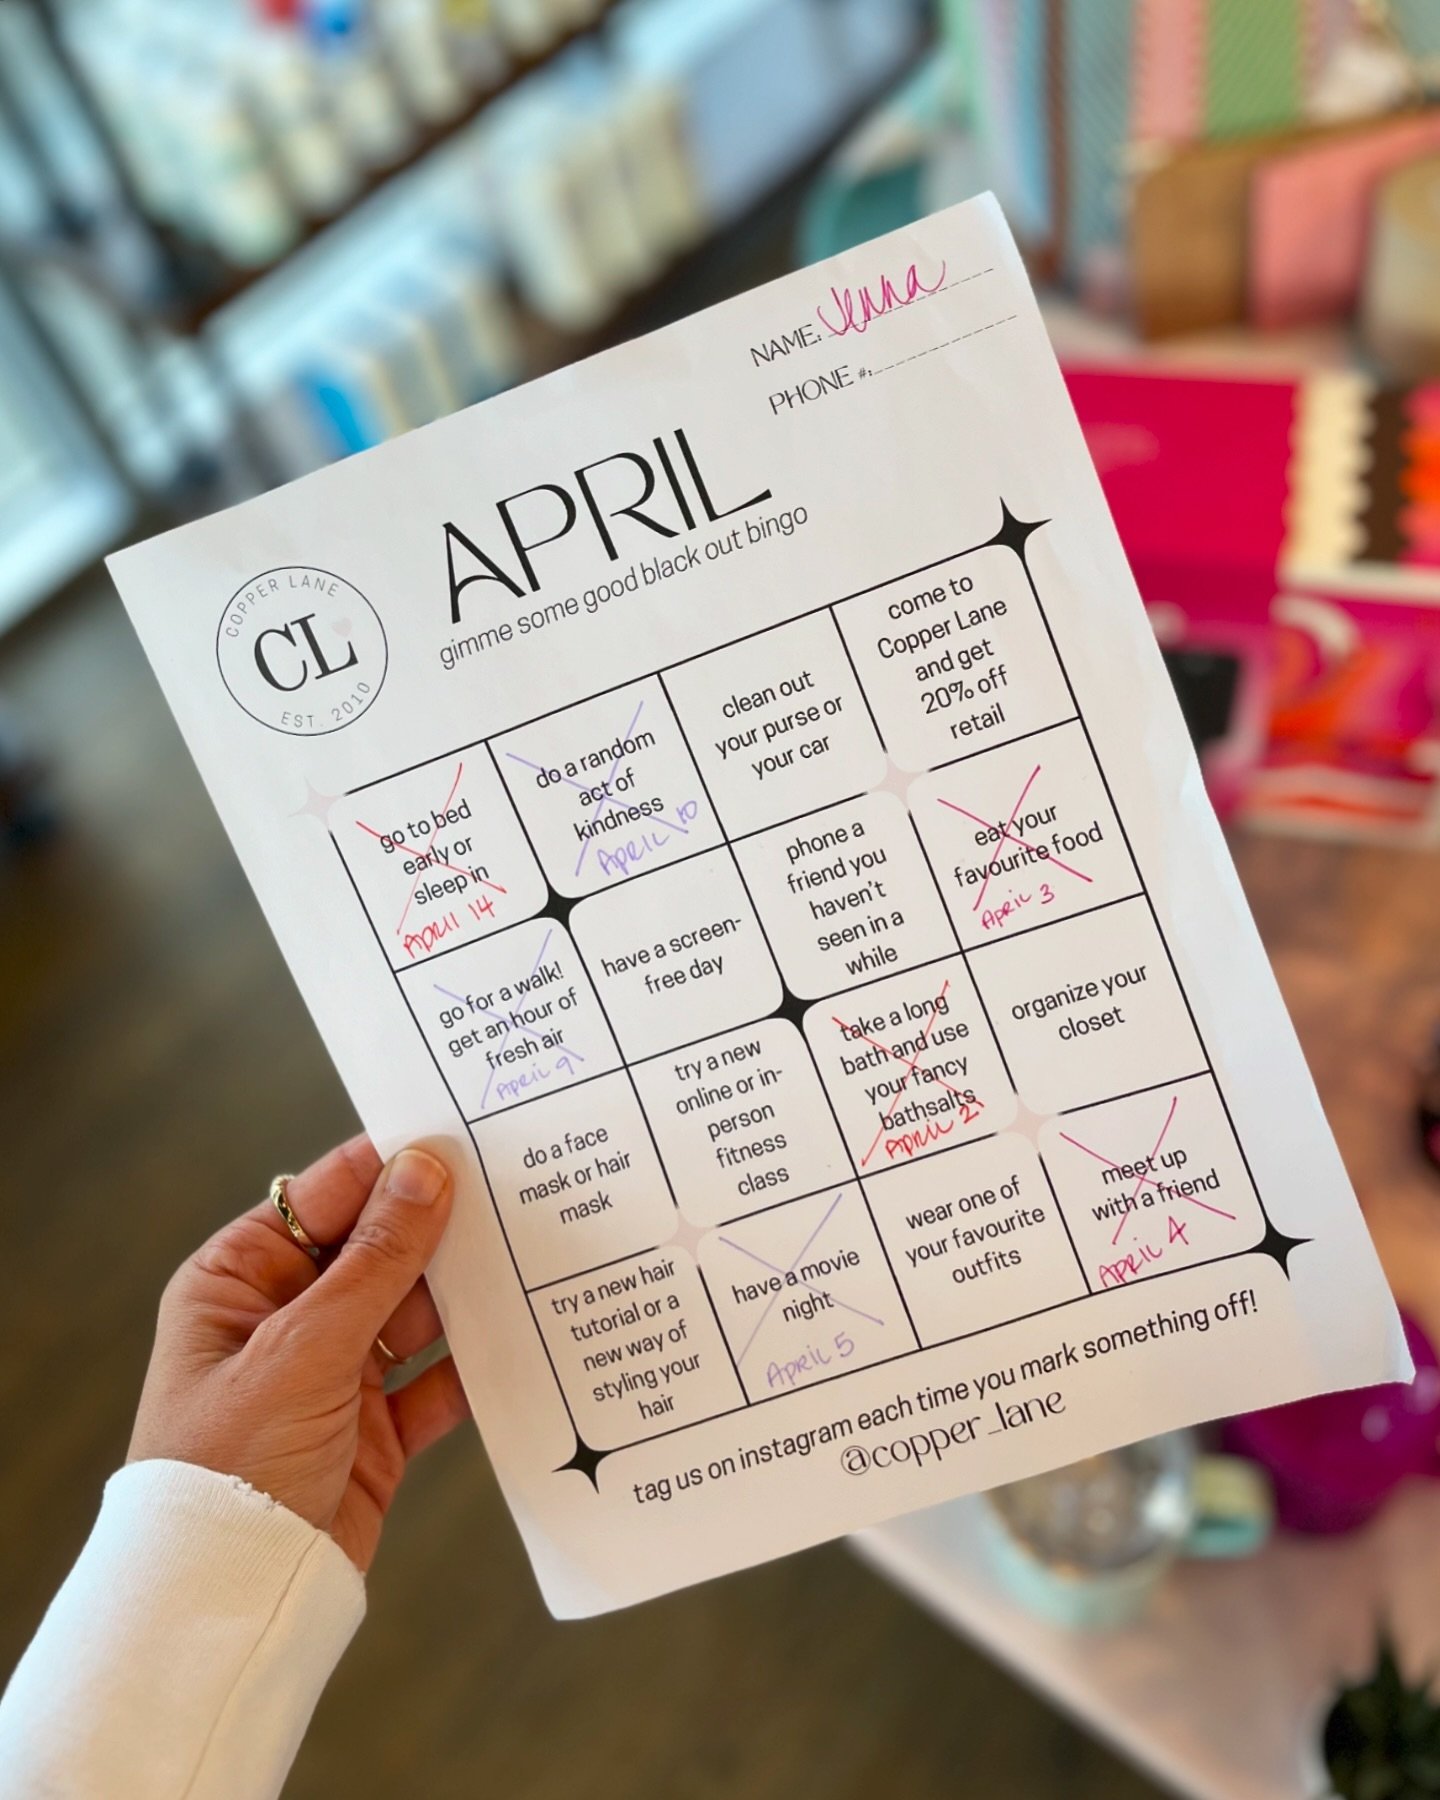 Ok Bingo people! How&rsquo;s it going? We&rsquo;re mid-month, it&rsquo;s time to get going on blacking out your squares!! Which one do you think will be the hardest to complete? Let us know in the comments ✨

Do you need a Bingo card? You can print o